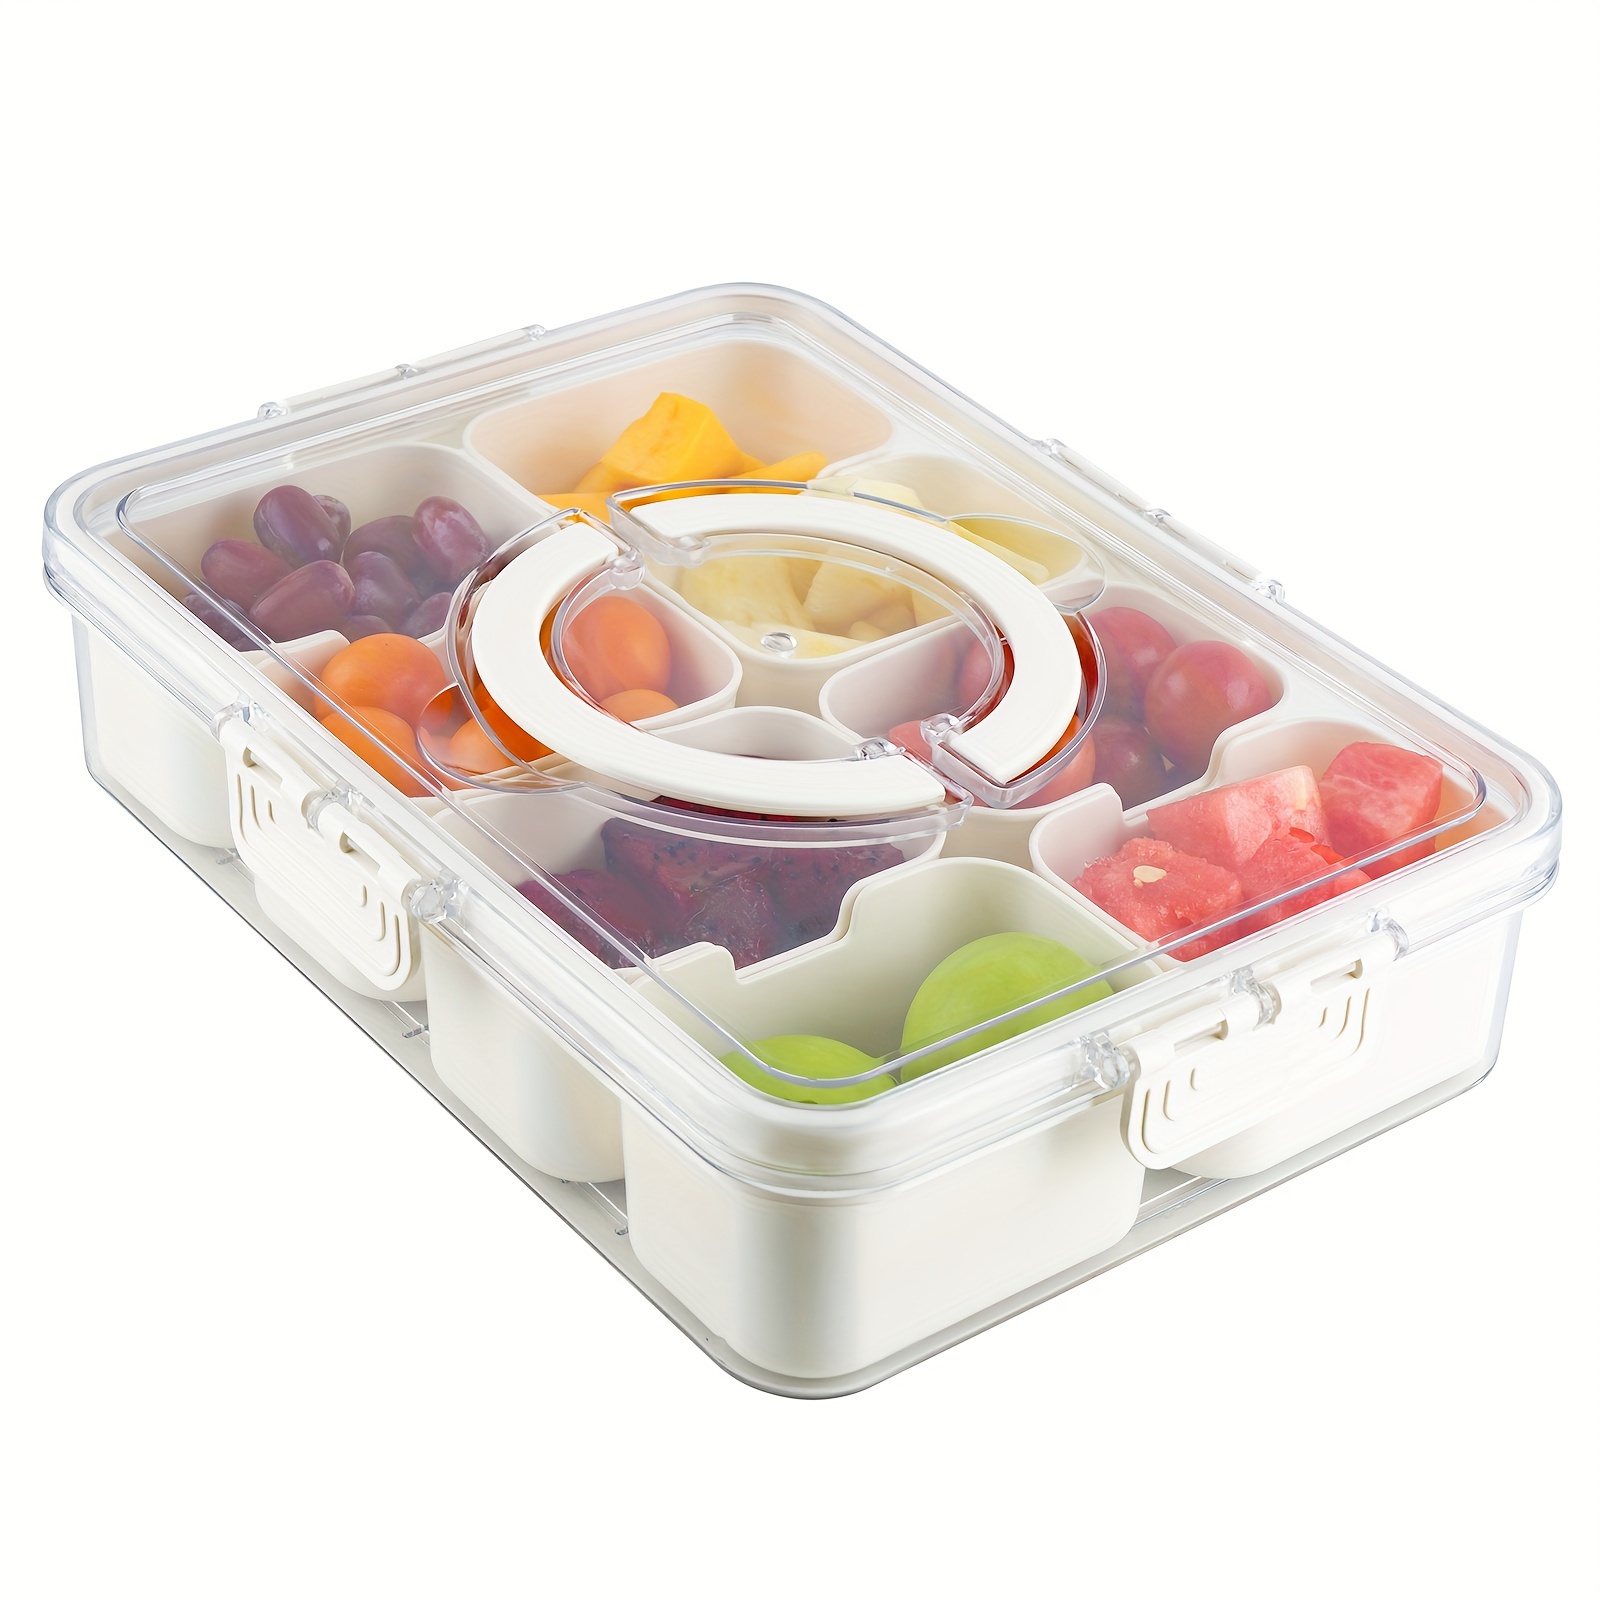 

1pc, Multi-compartment Box With Handle, Plastic Food Serving Tray With Lid, Stackable Fruit And Vegetable Container, 8 Detachable Mini Boxes For Snacks, Salads, Candy